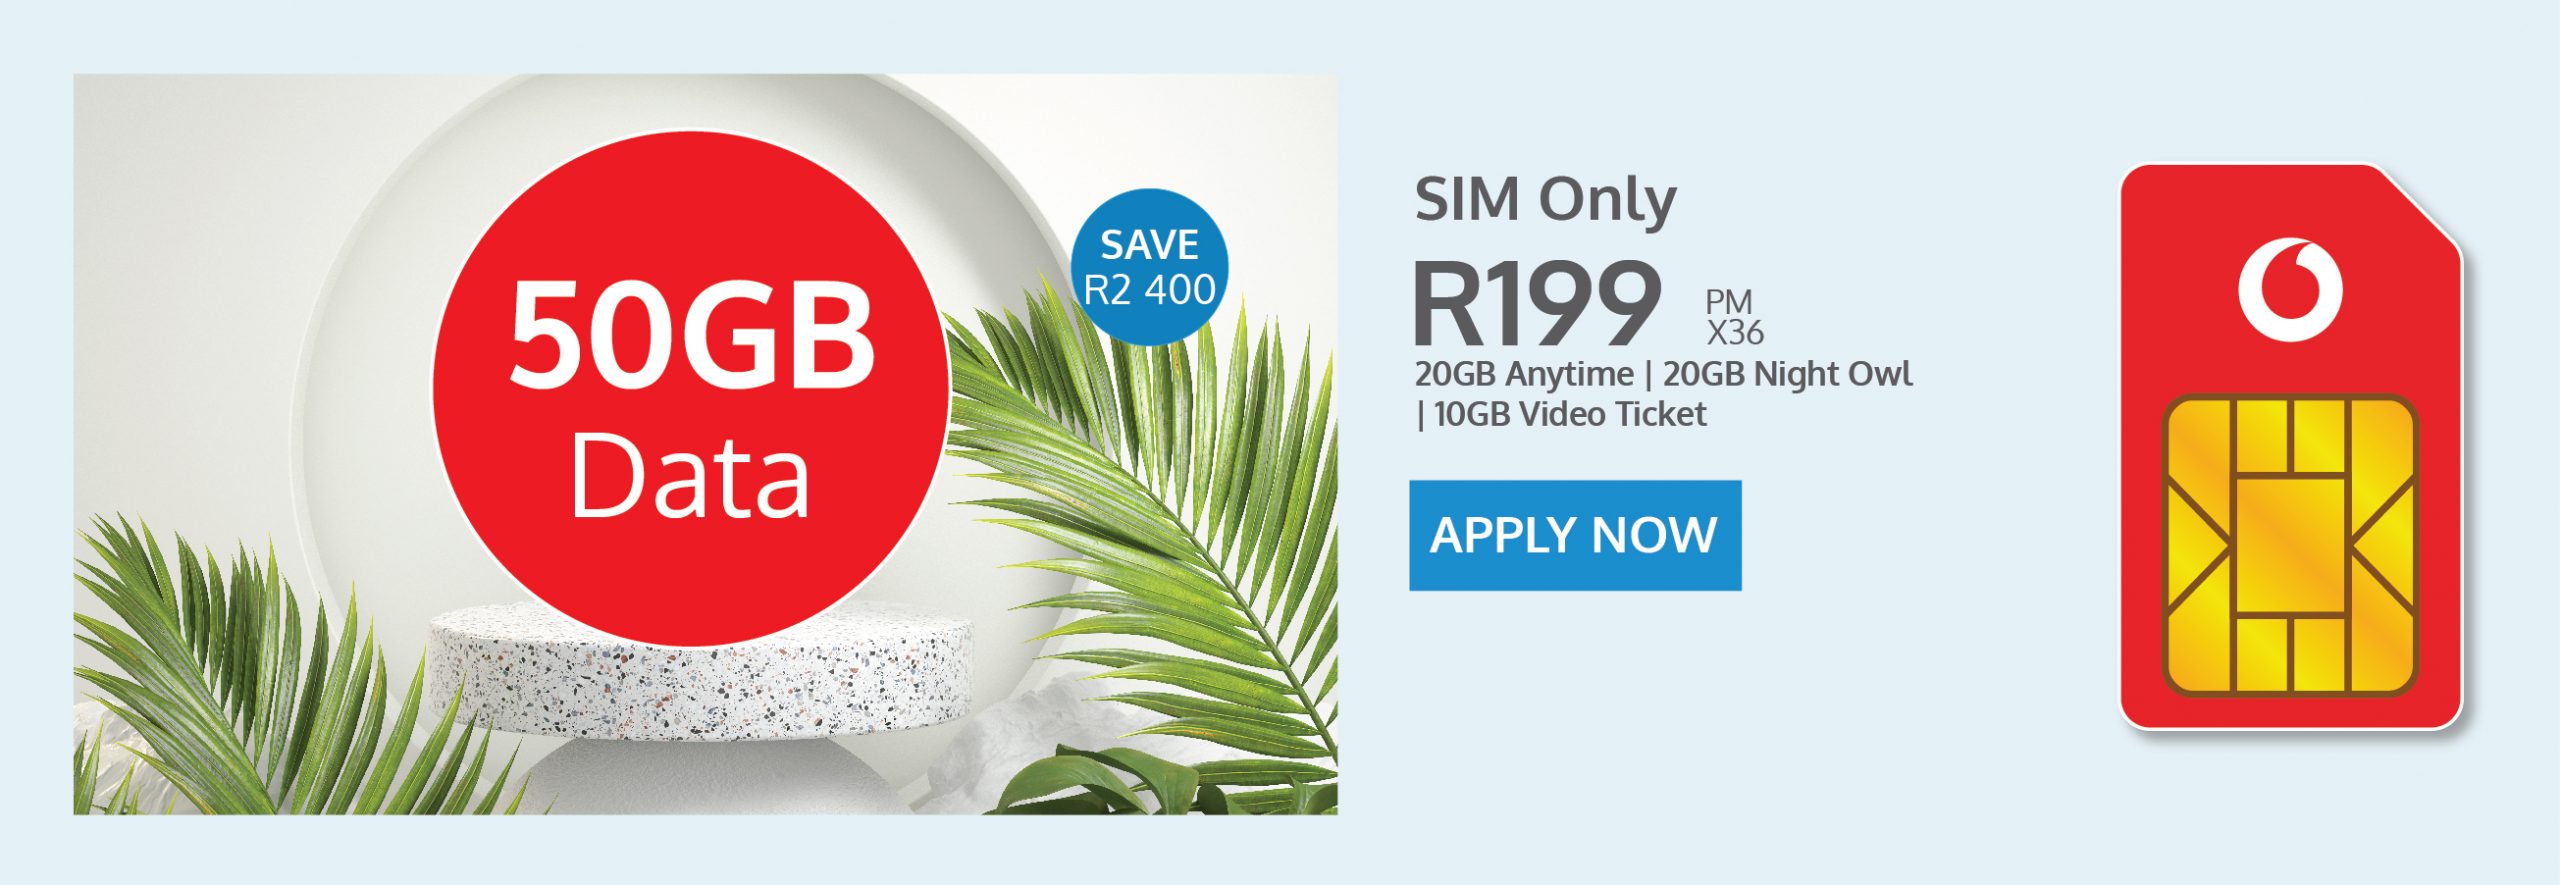 SIM only data contract 50GB deal